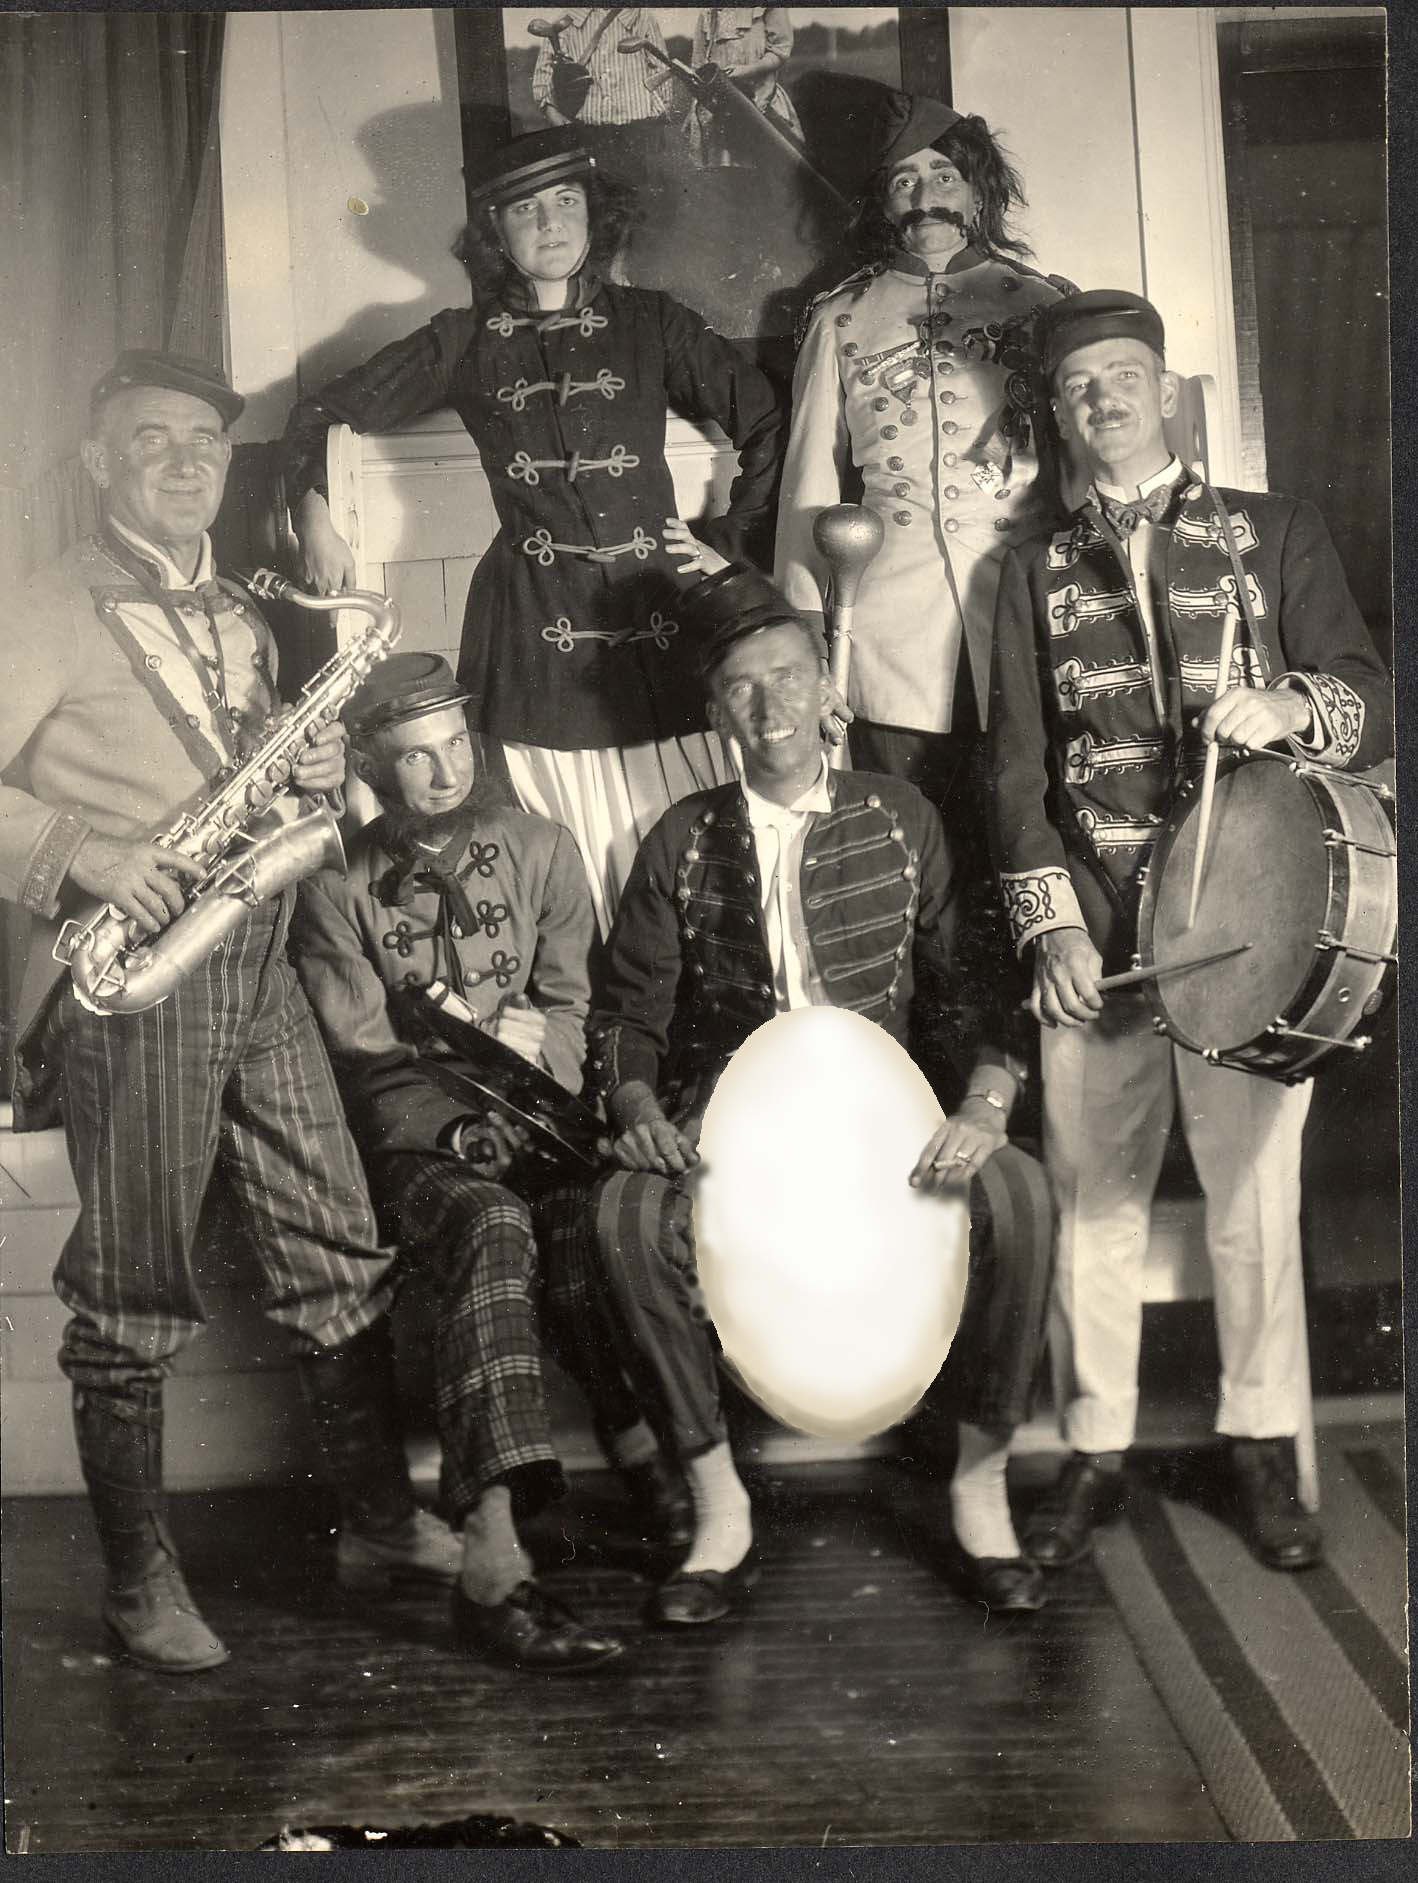 The Stake and Eggs band.  (c. 1927)